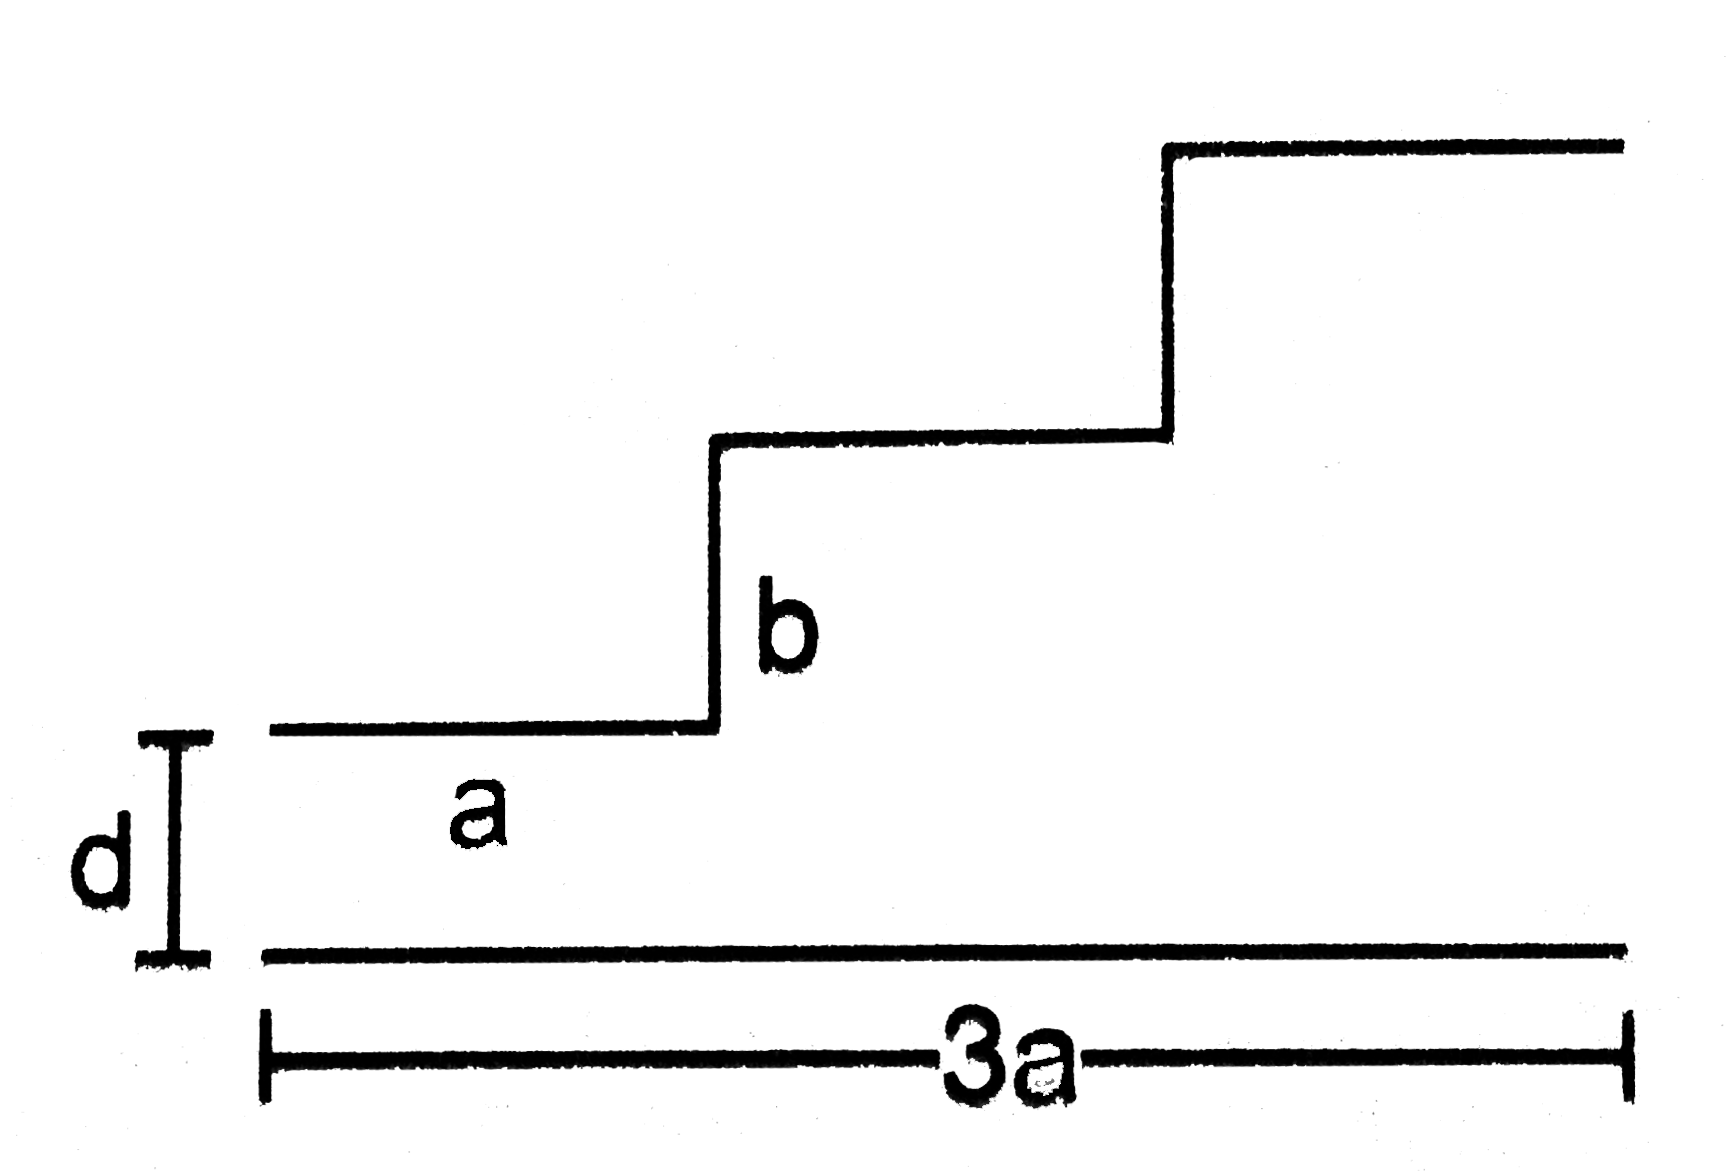 A capacitor is made of a flat plate of area A and B second plate having a stair -like structure as shown in figure (31-E9). The width of each stair is a and the height is b . Find the capacitance of the assembly.